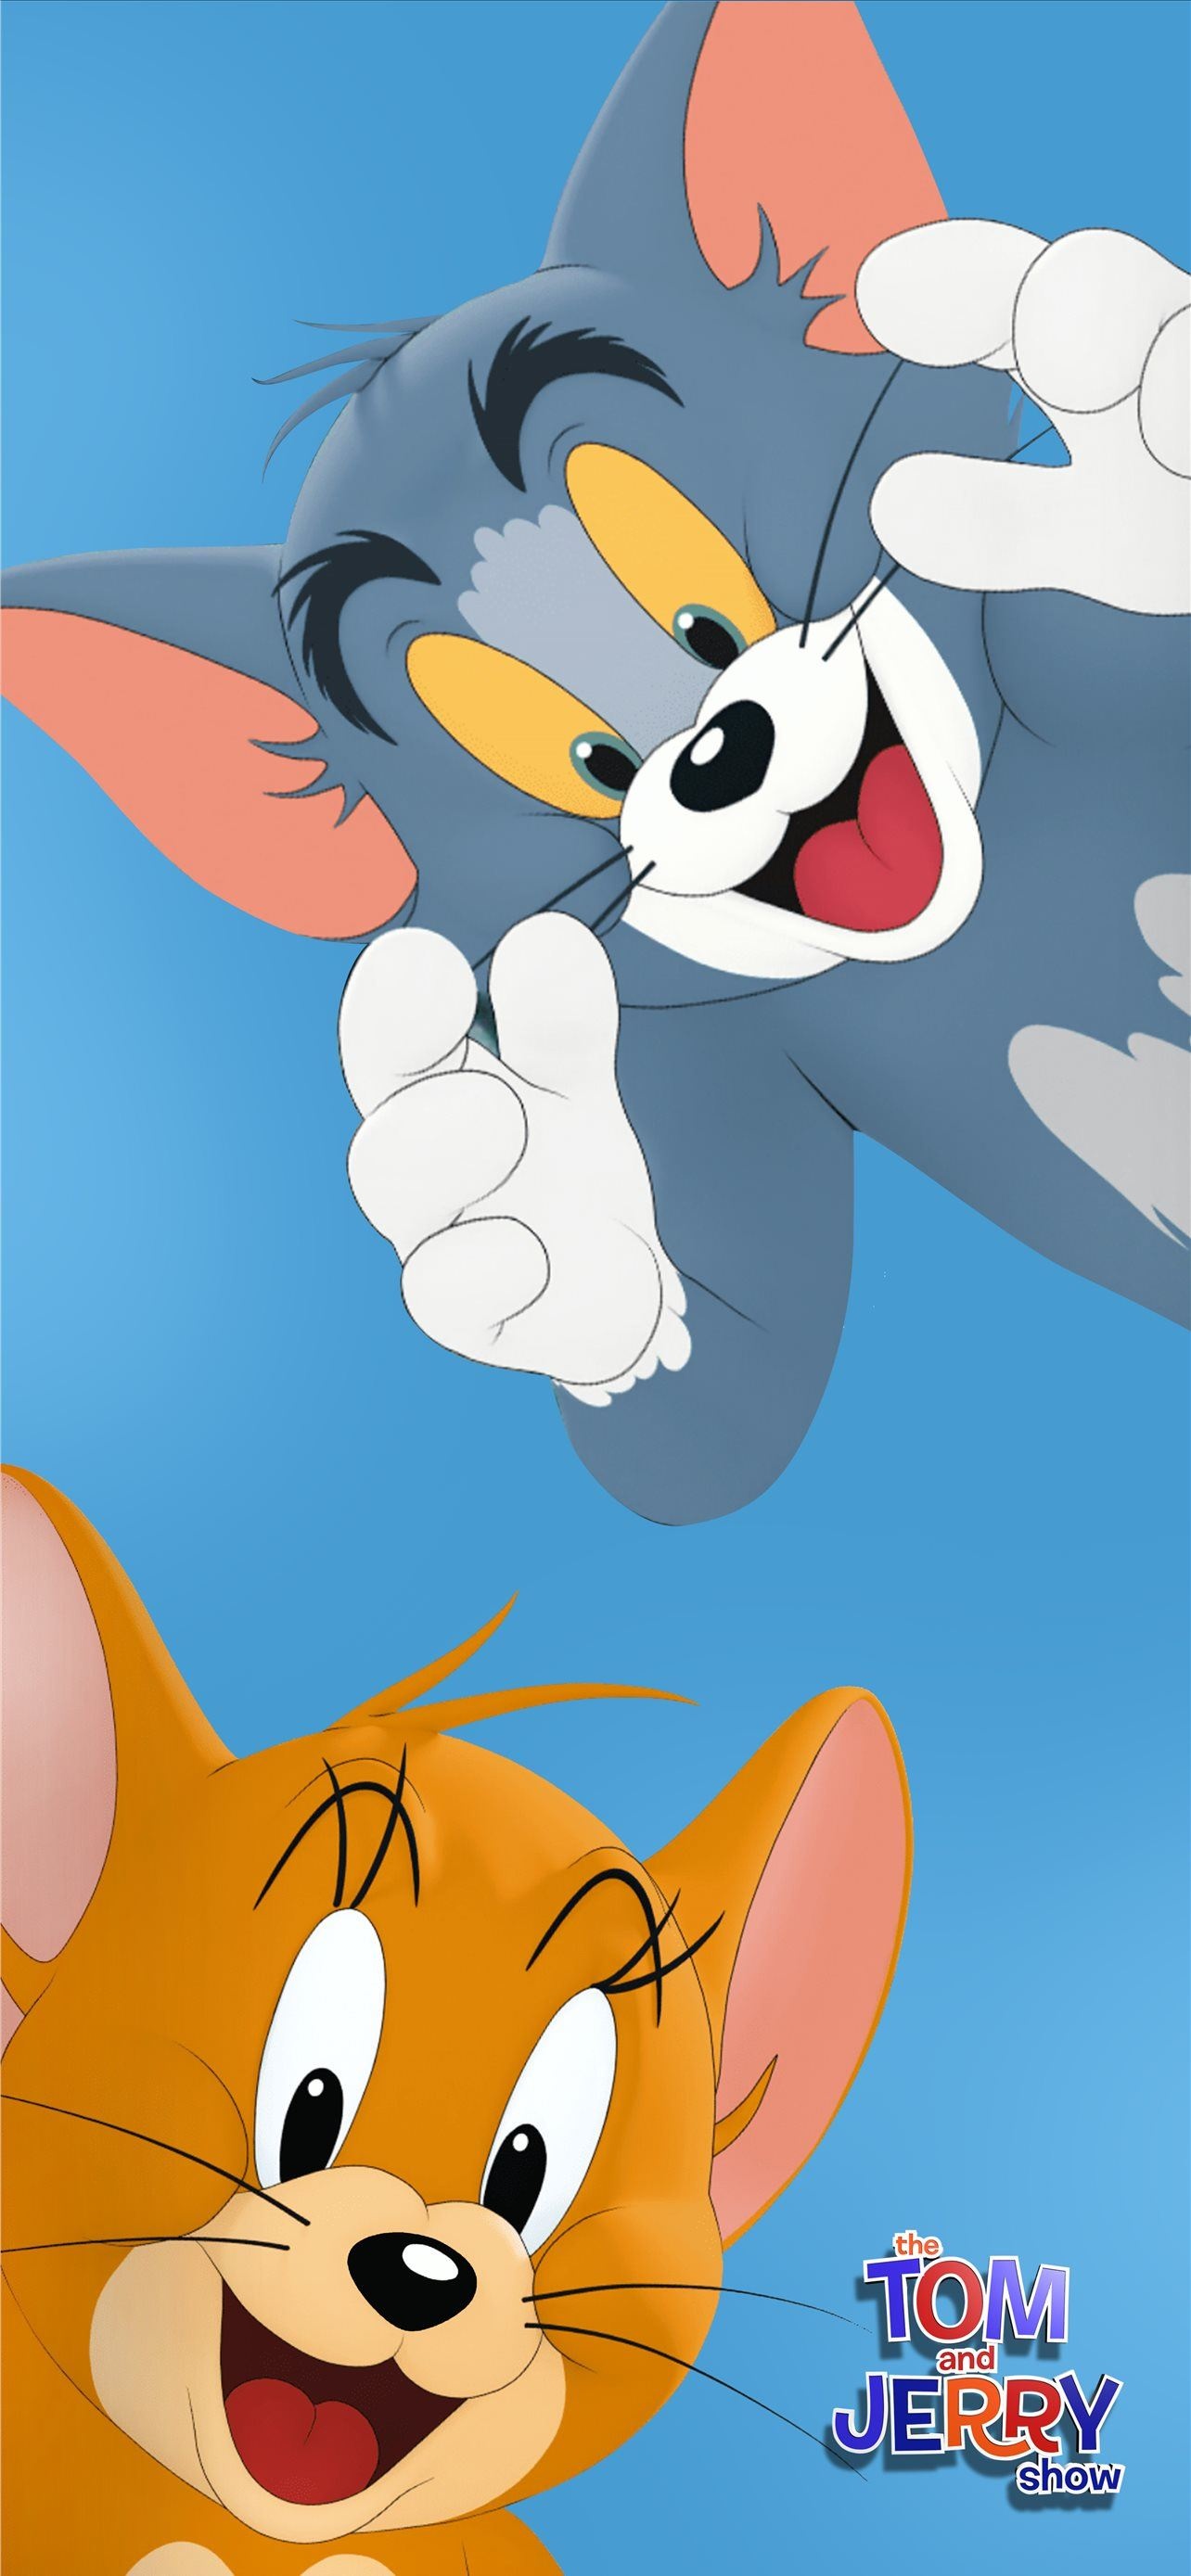 The Tom and Jerry show, iPhone wallpapers, Cute illustrations, Cartoon nostalgia, 1290x2780 HD Handy